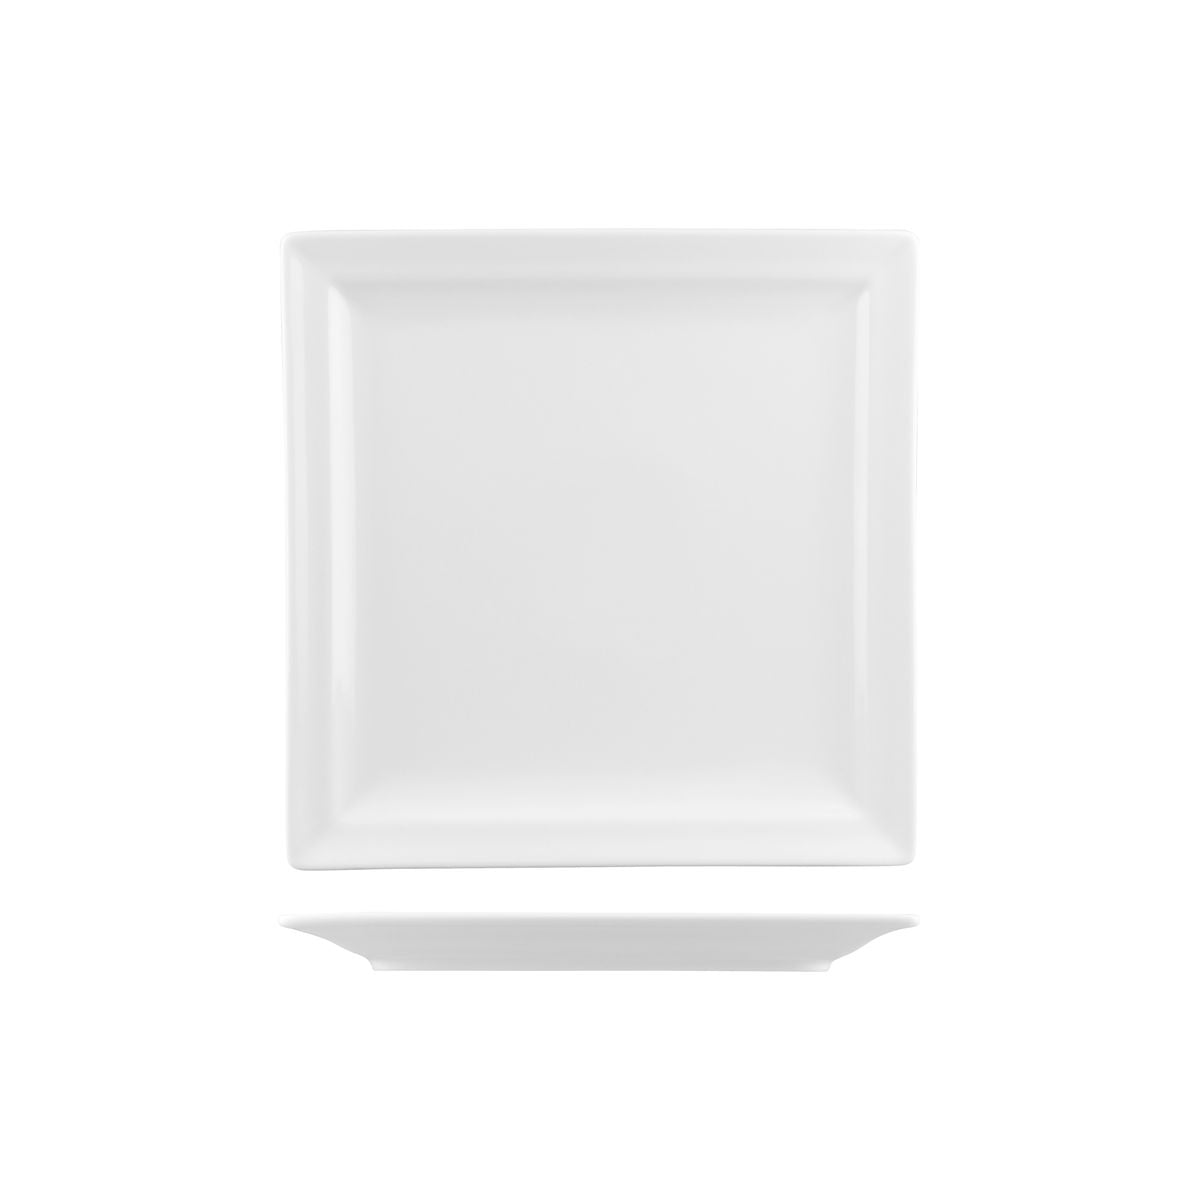 Classic Gourmet Square Plate 272mm: Pack of 12